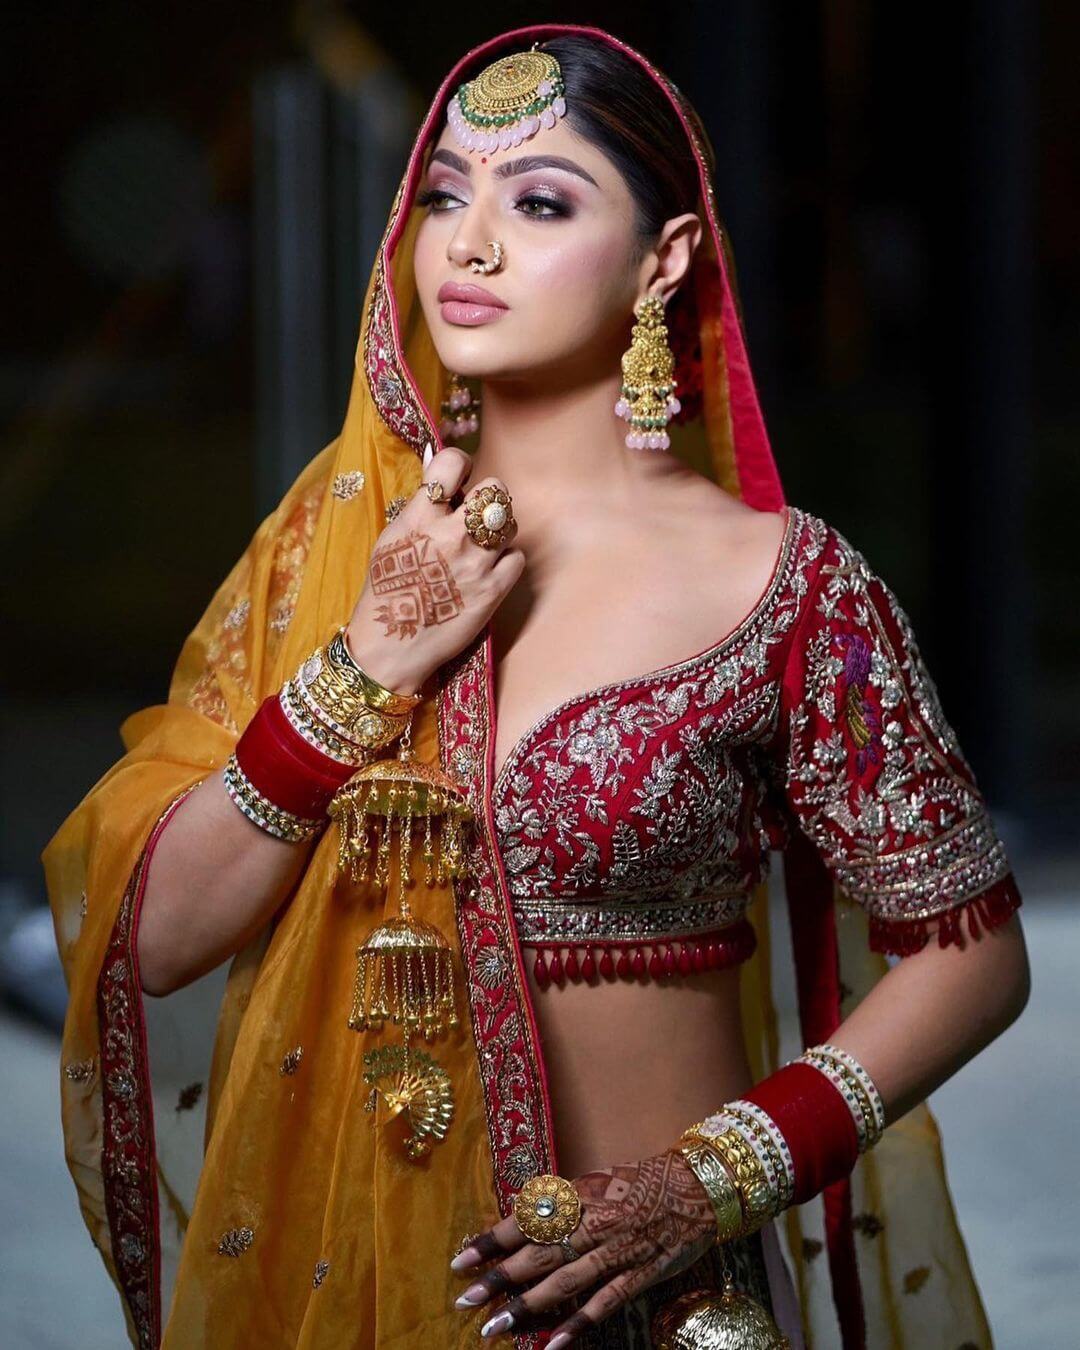 Akanksha Puri Is Looking Like a Beautiful Indian Bride In Red Blouse With Mustard Yellow Dupatta And Chuda